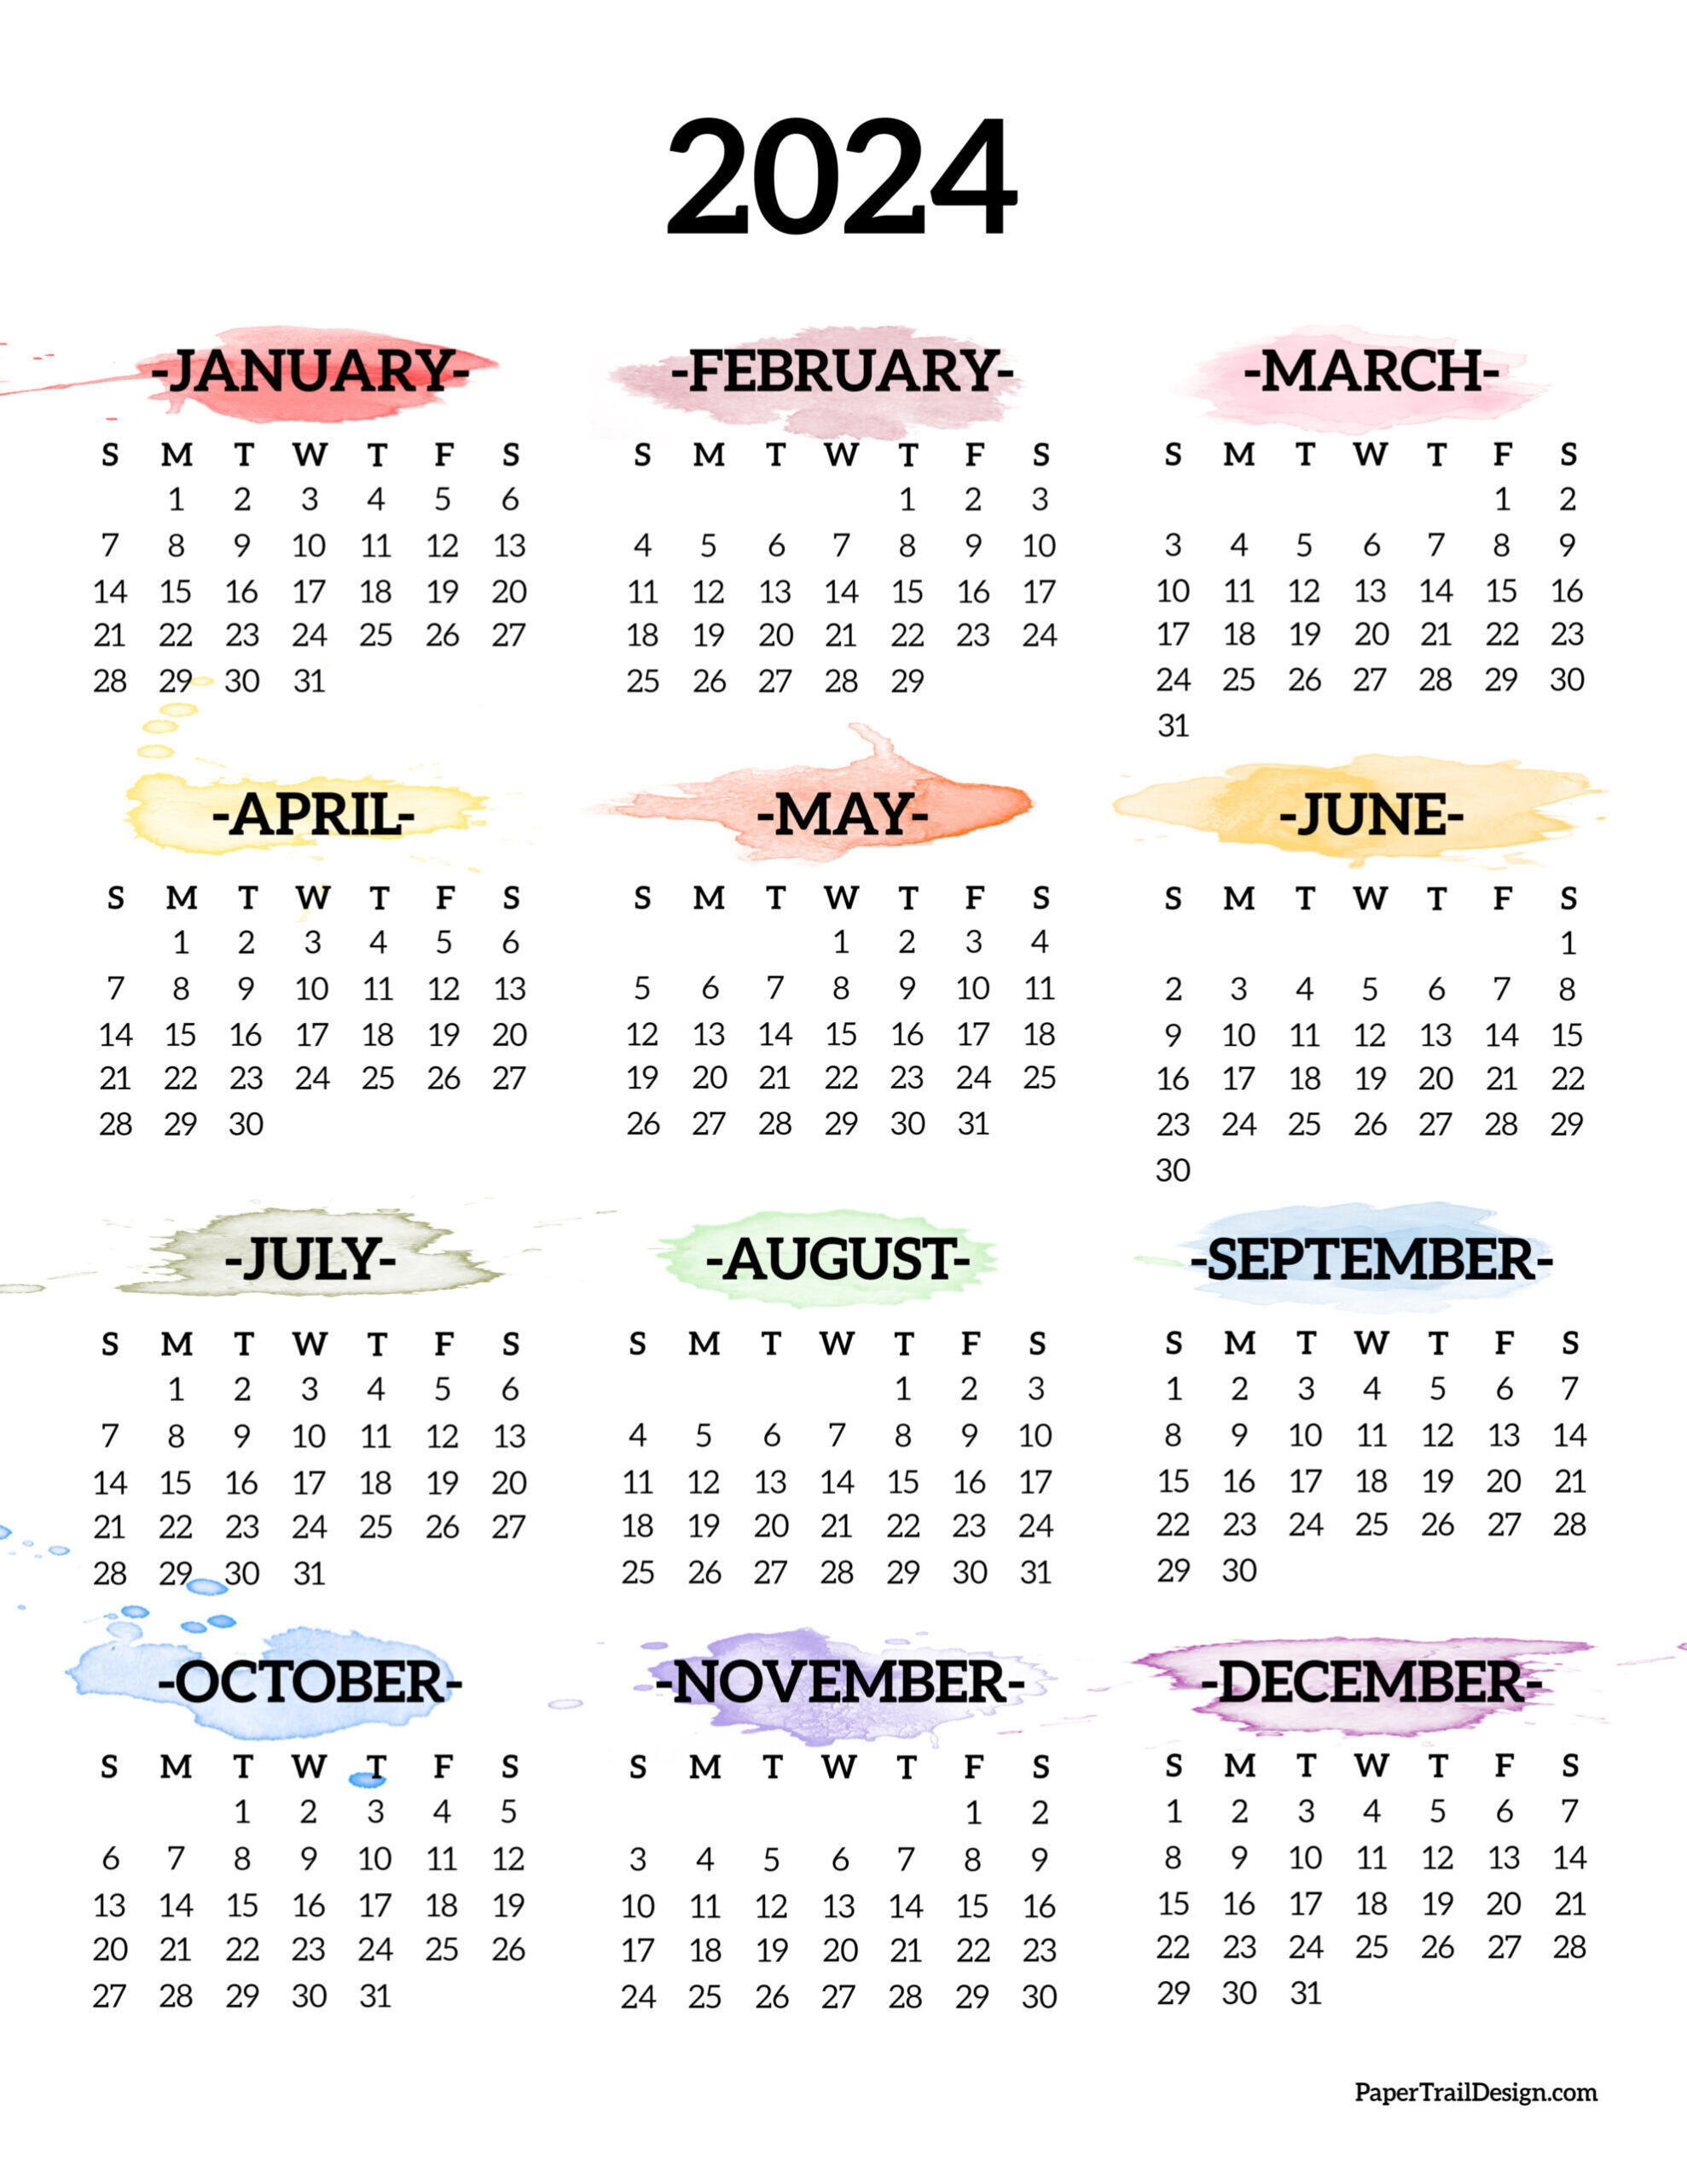 Calendar 2024 Printable One Page - Paper Trail Design for 2024 Single Page Printable Calendar